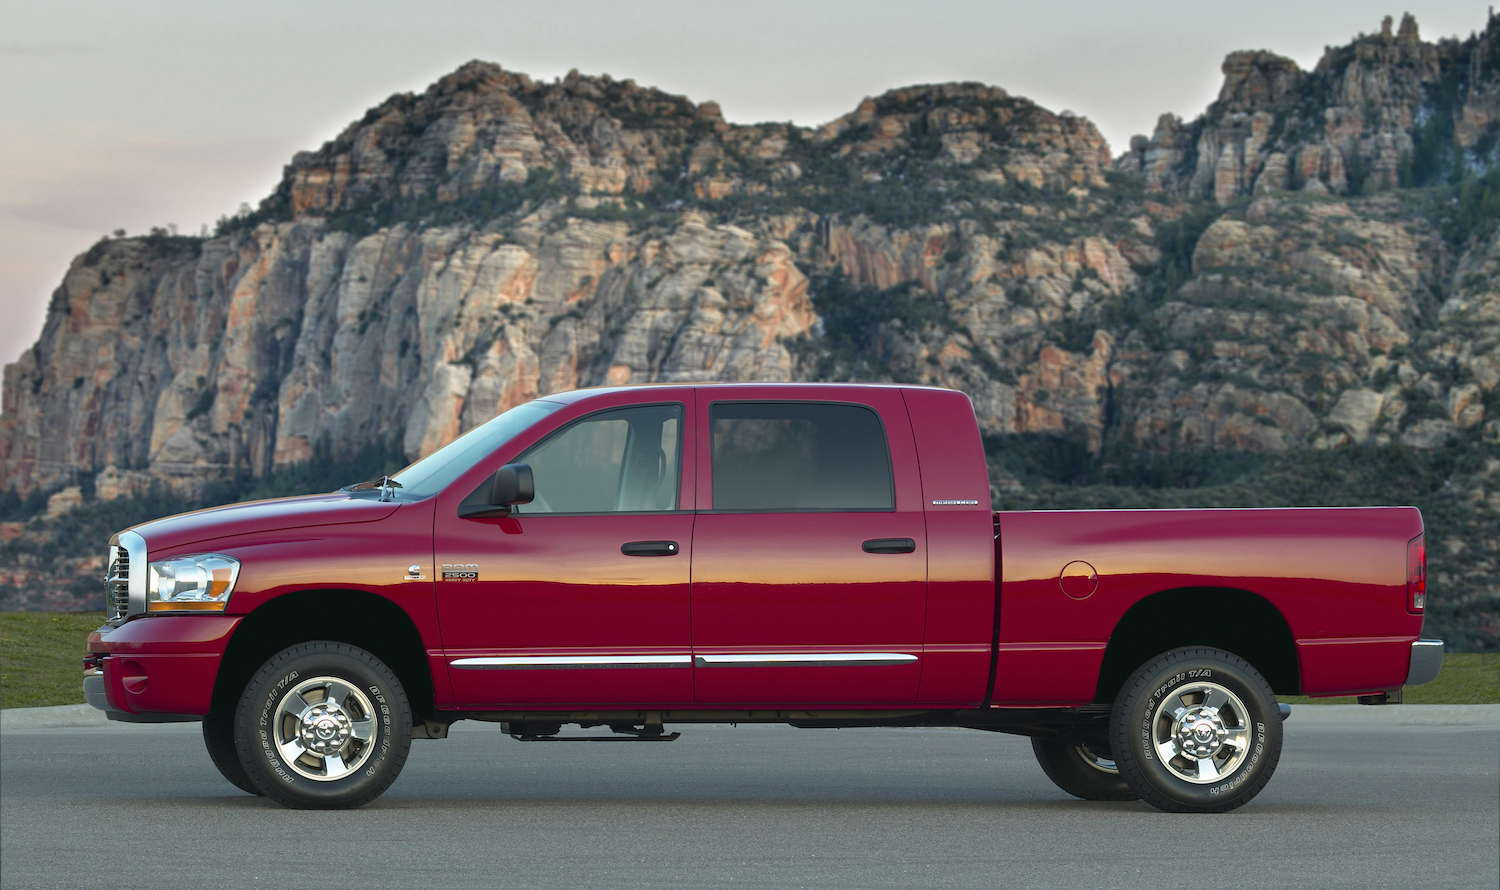 A red 2008 Dodge Ram diesel pickup with a manual transmission